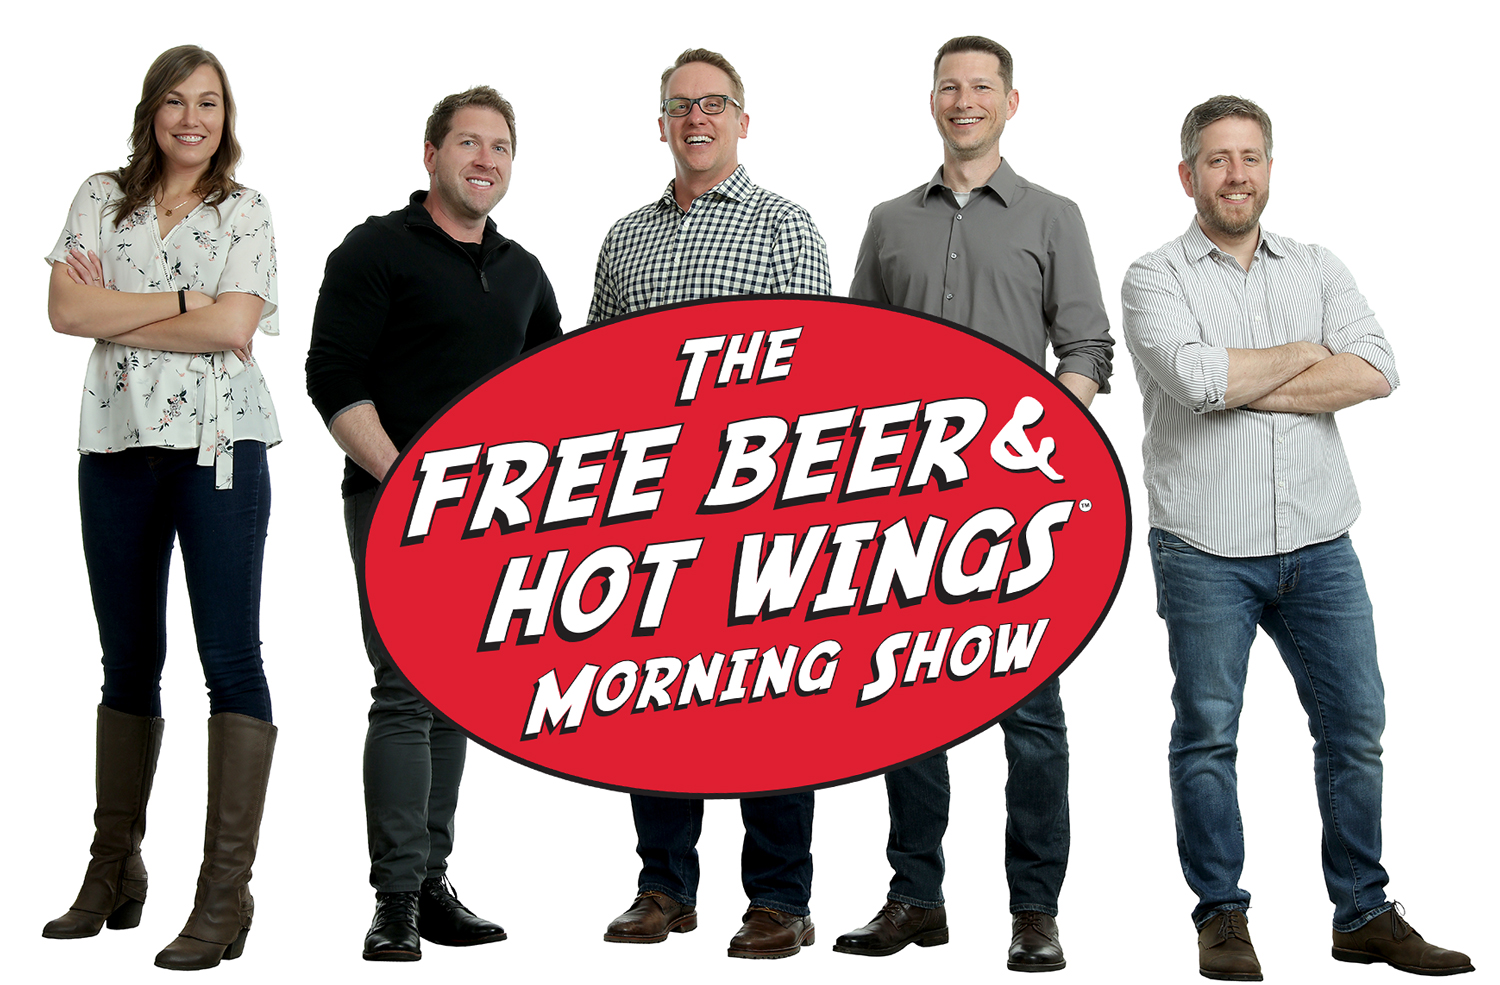 Hosted by Gregg "Free Beer" Daniels, Chris "Hot Wings" ...